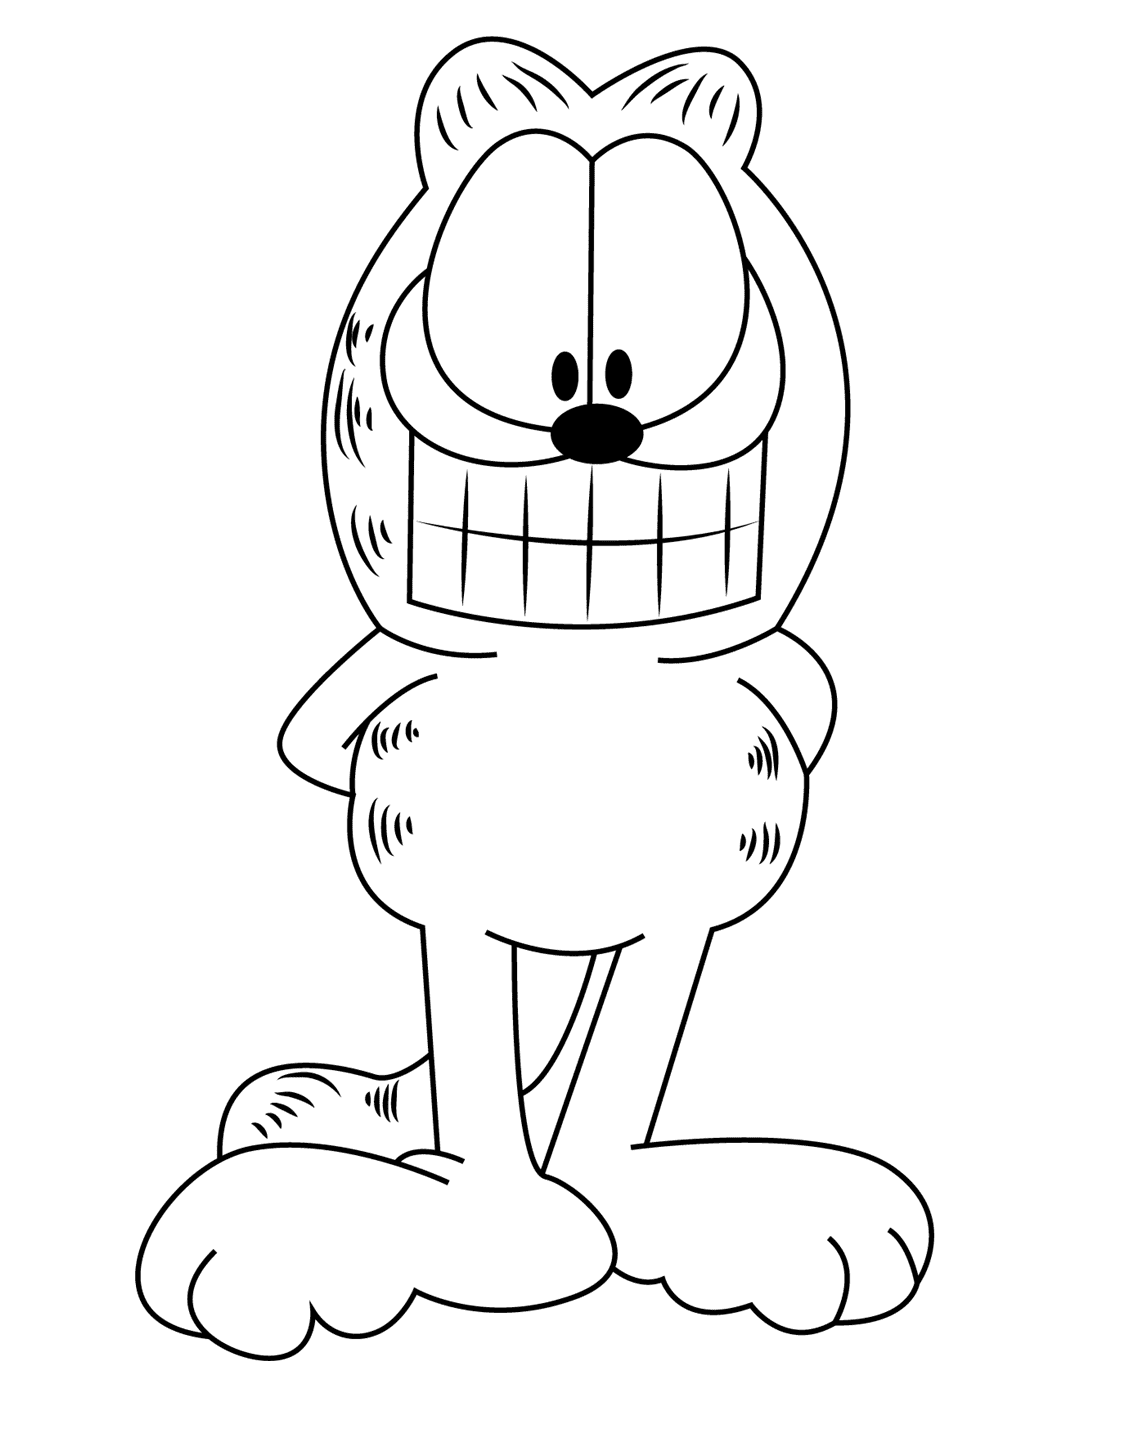 Garfield Smiling Coloring Page